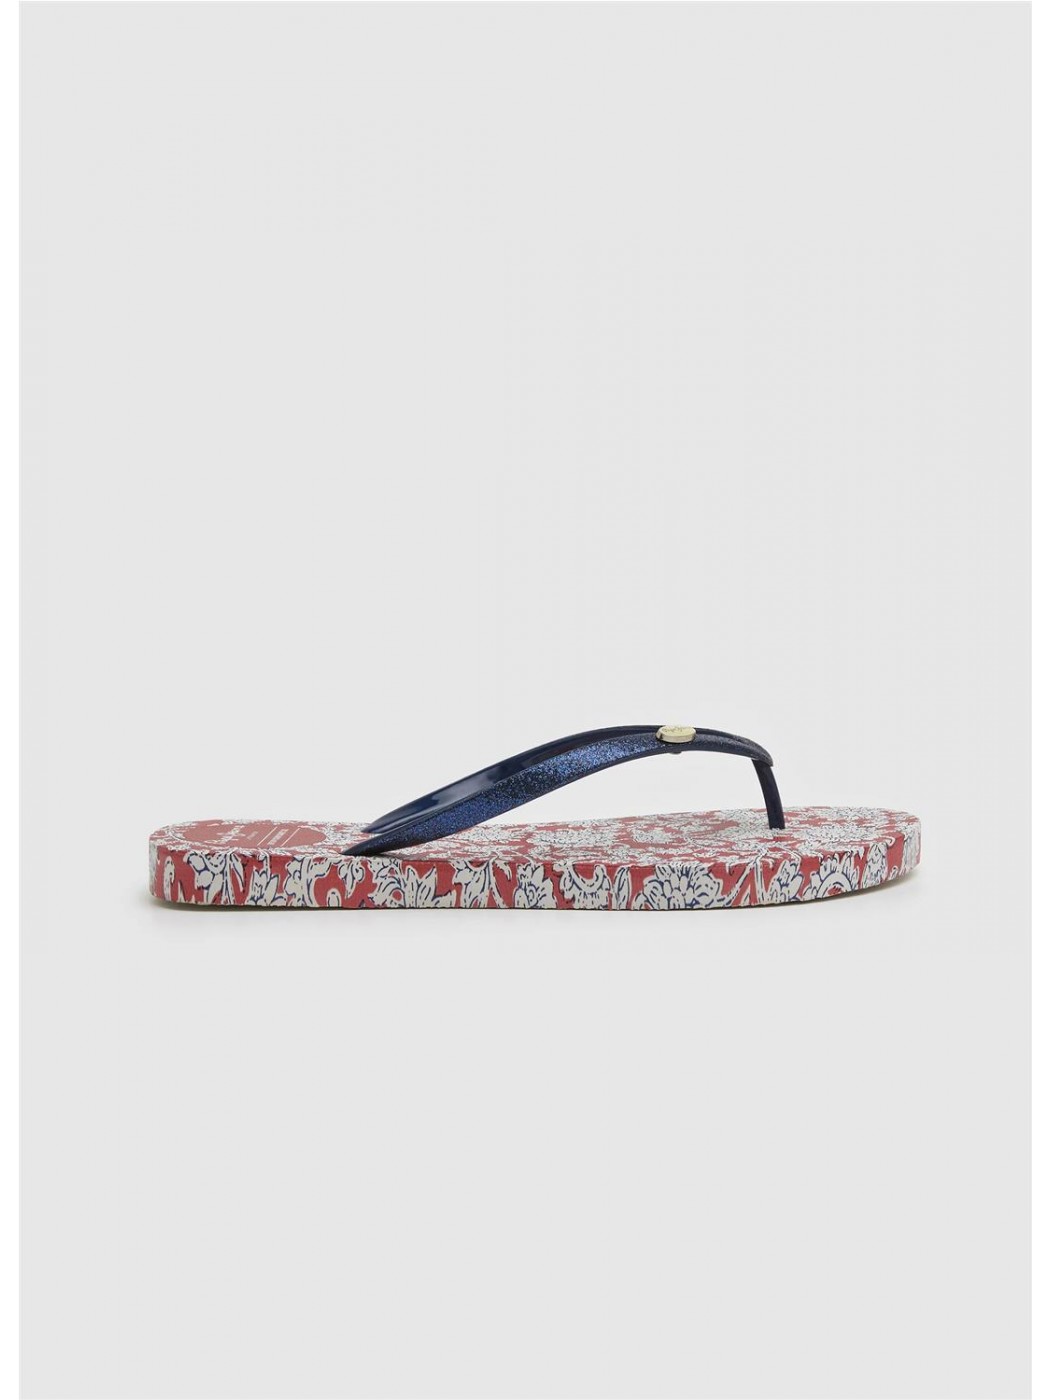 CHANCLAS PEPE JEANS MUJER...